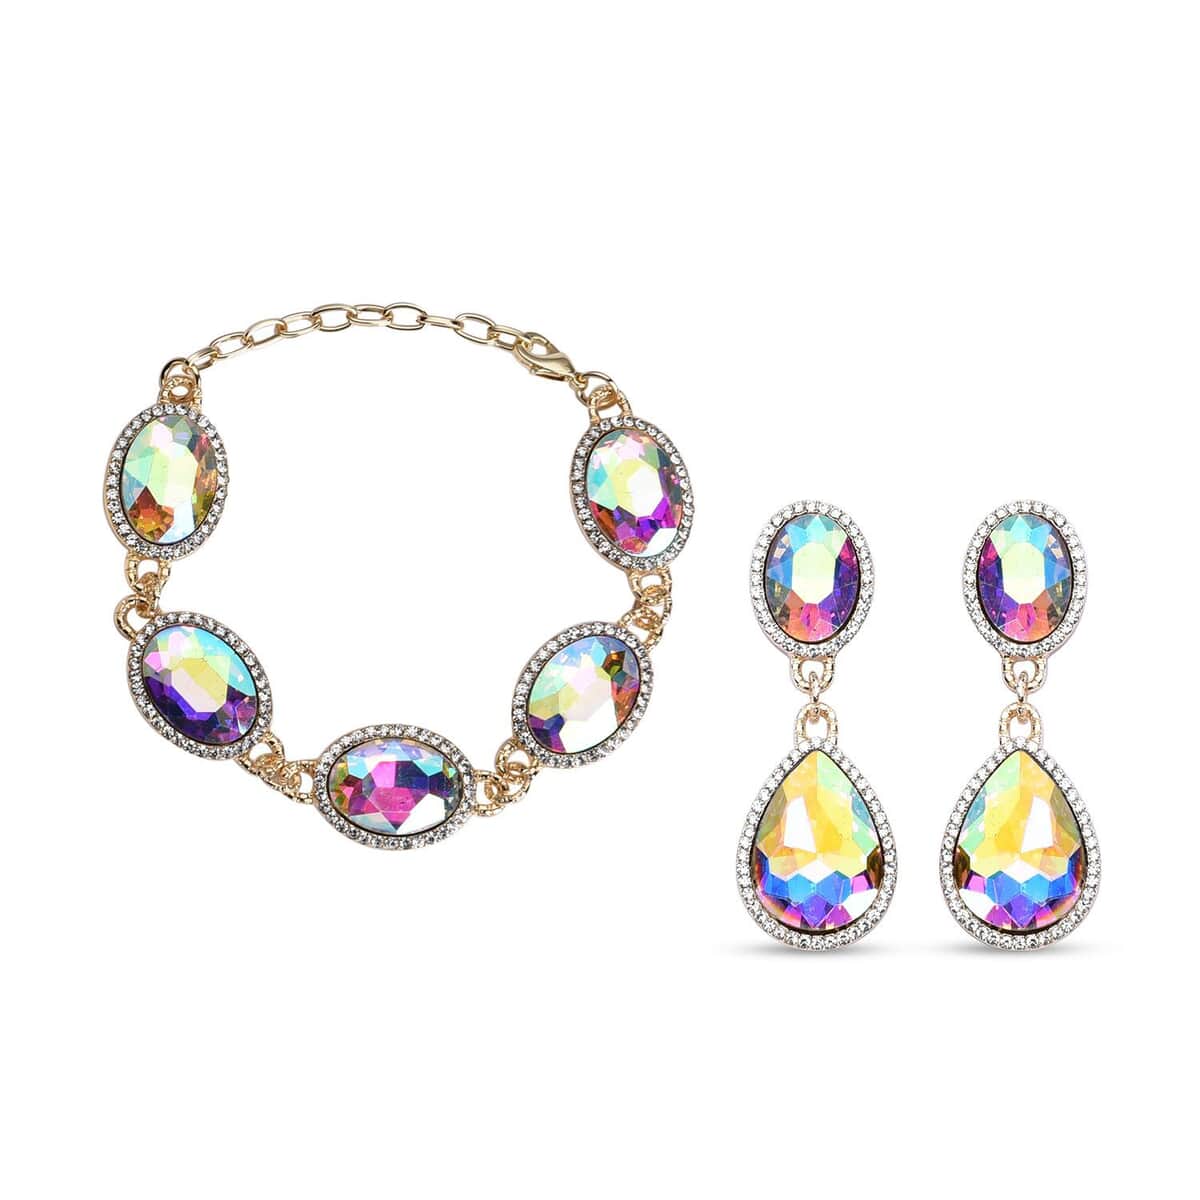 Simulated Aurora Borealis and Austrian Crystal Link Bracelet (7.0-9.0In) and Earrings in Goldtone image number 0